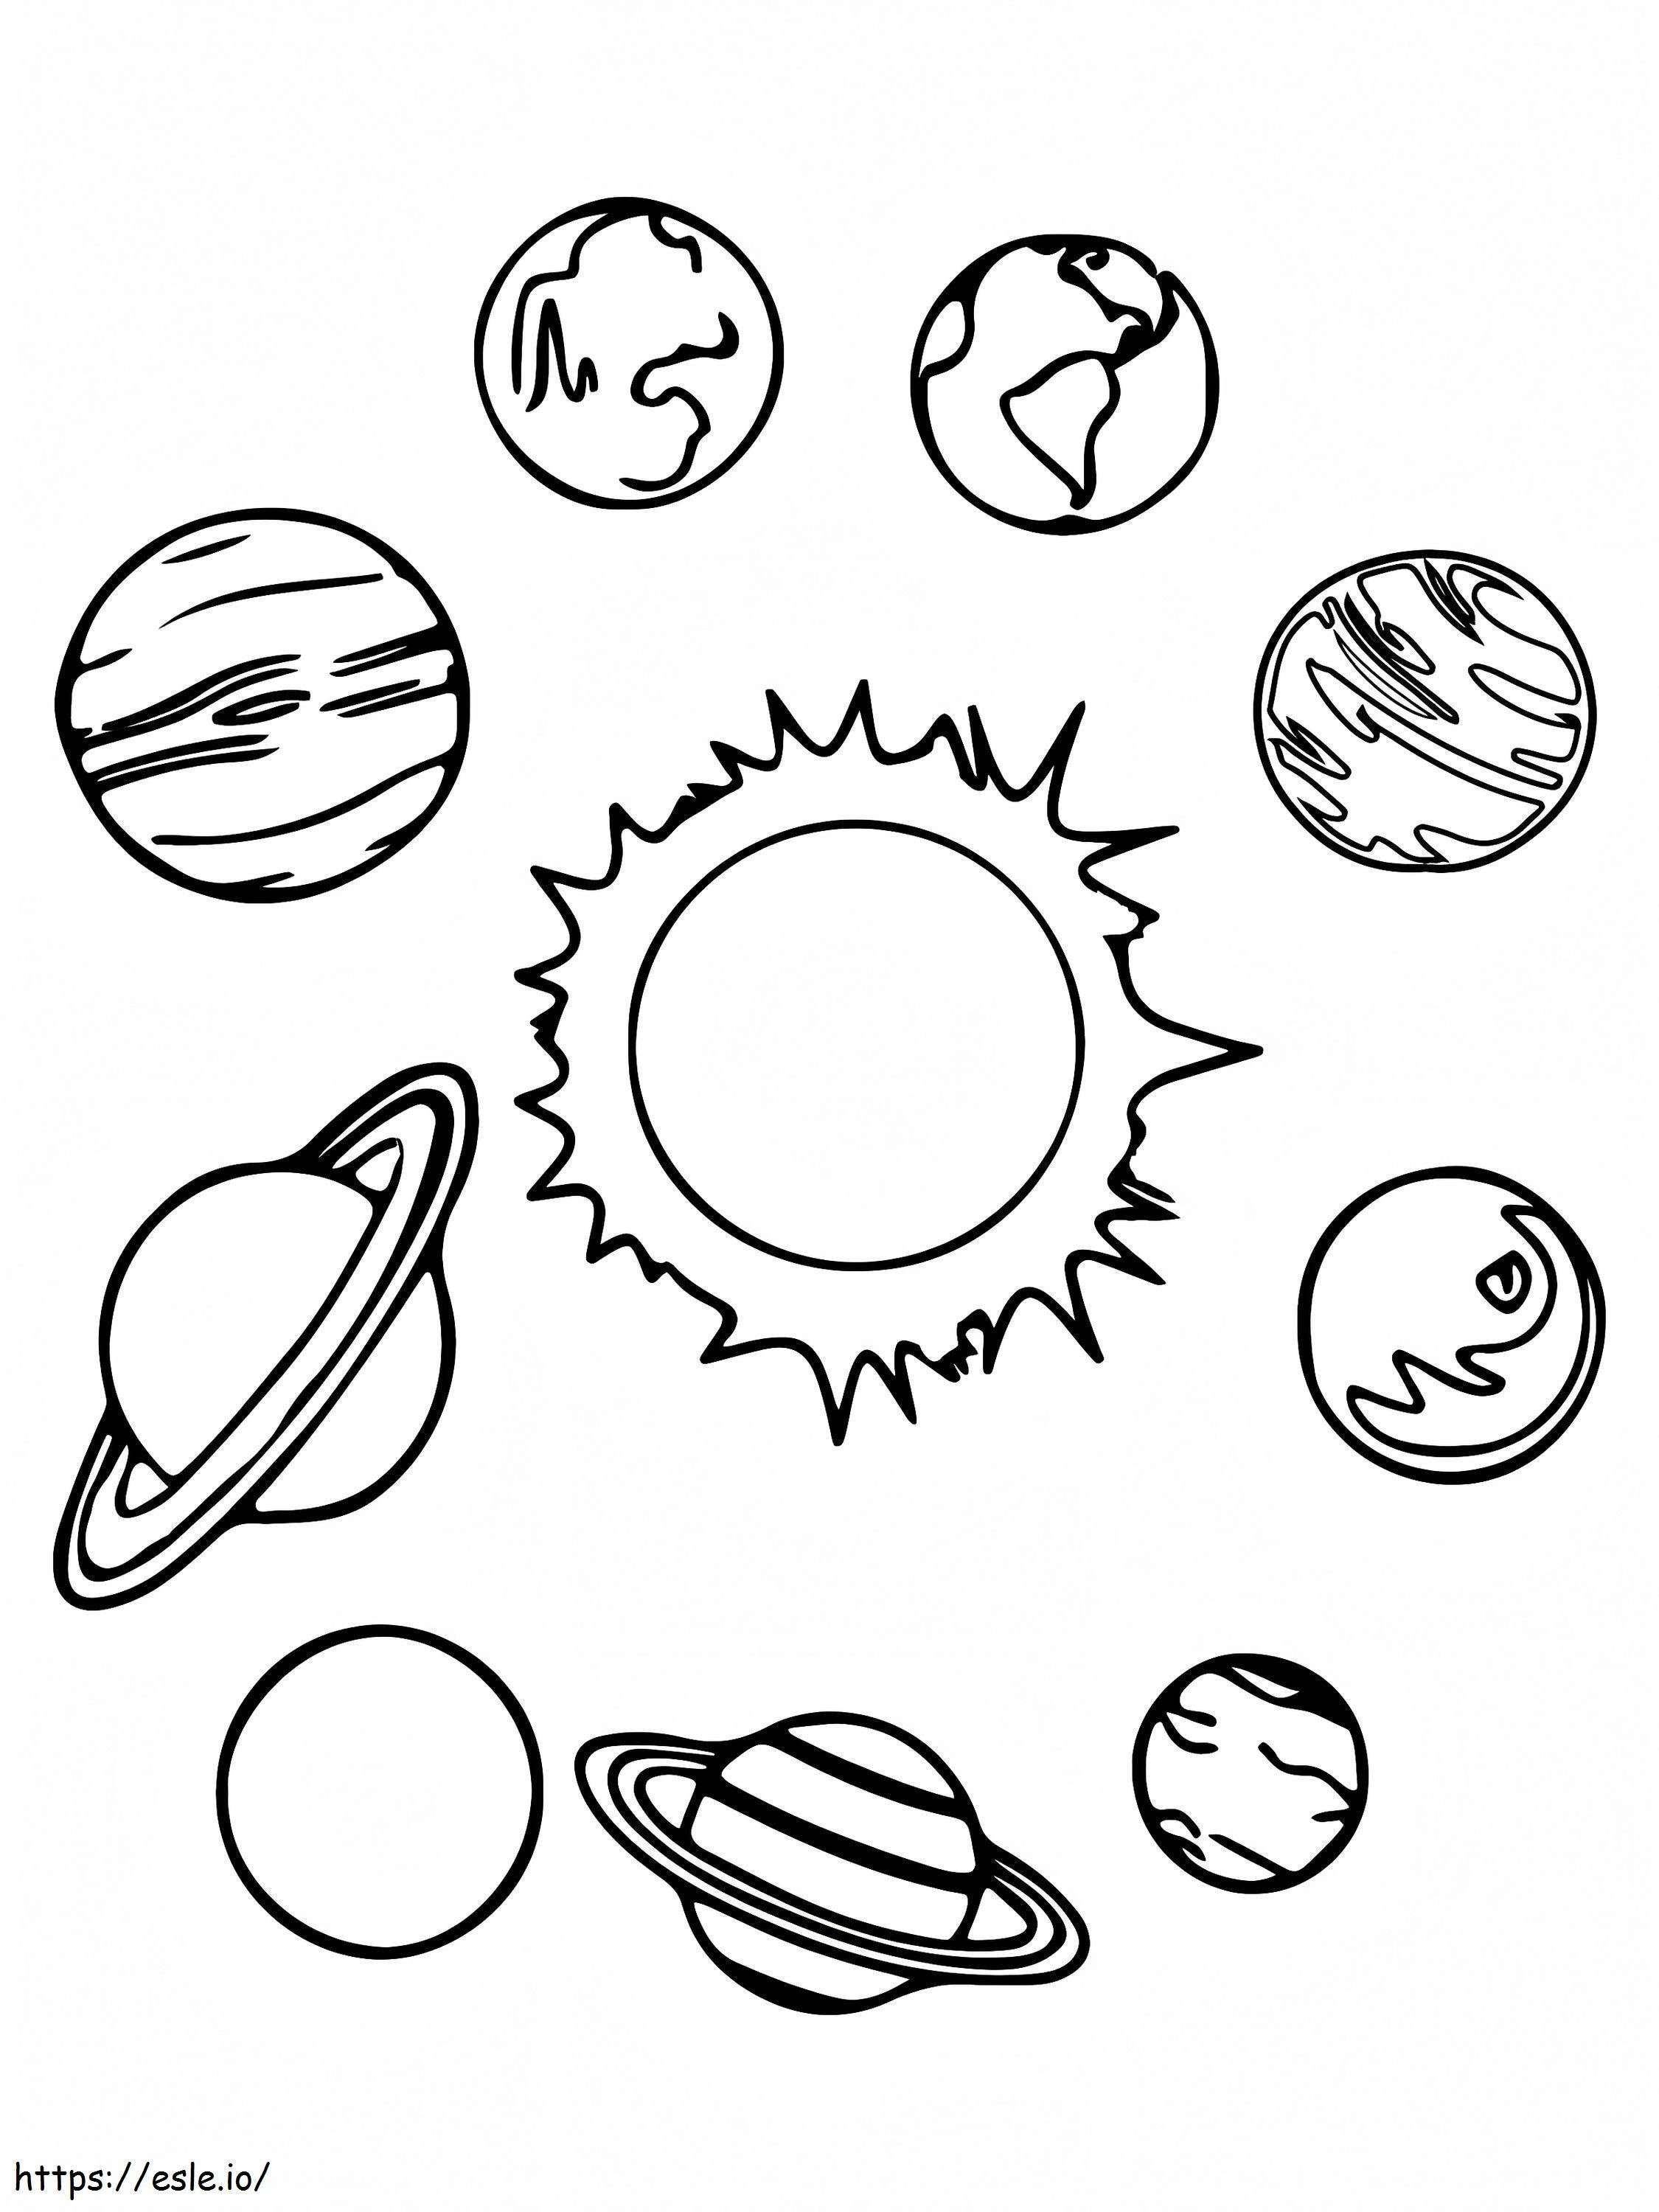 Planets In The Solar System coloring page